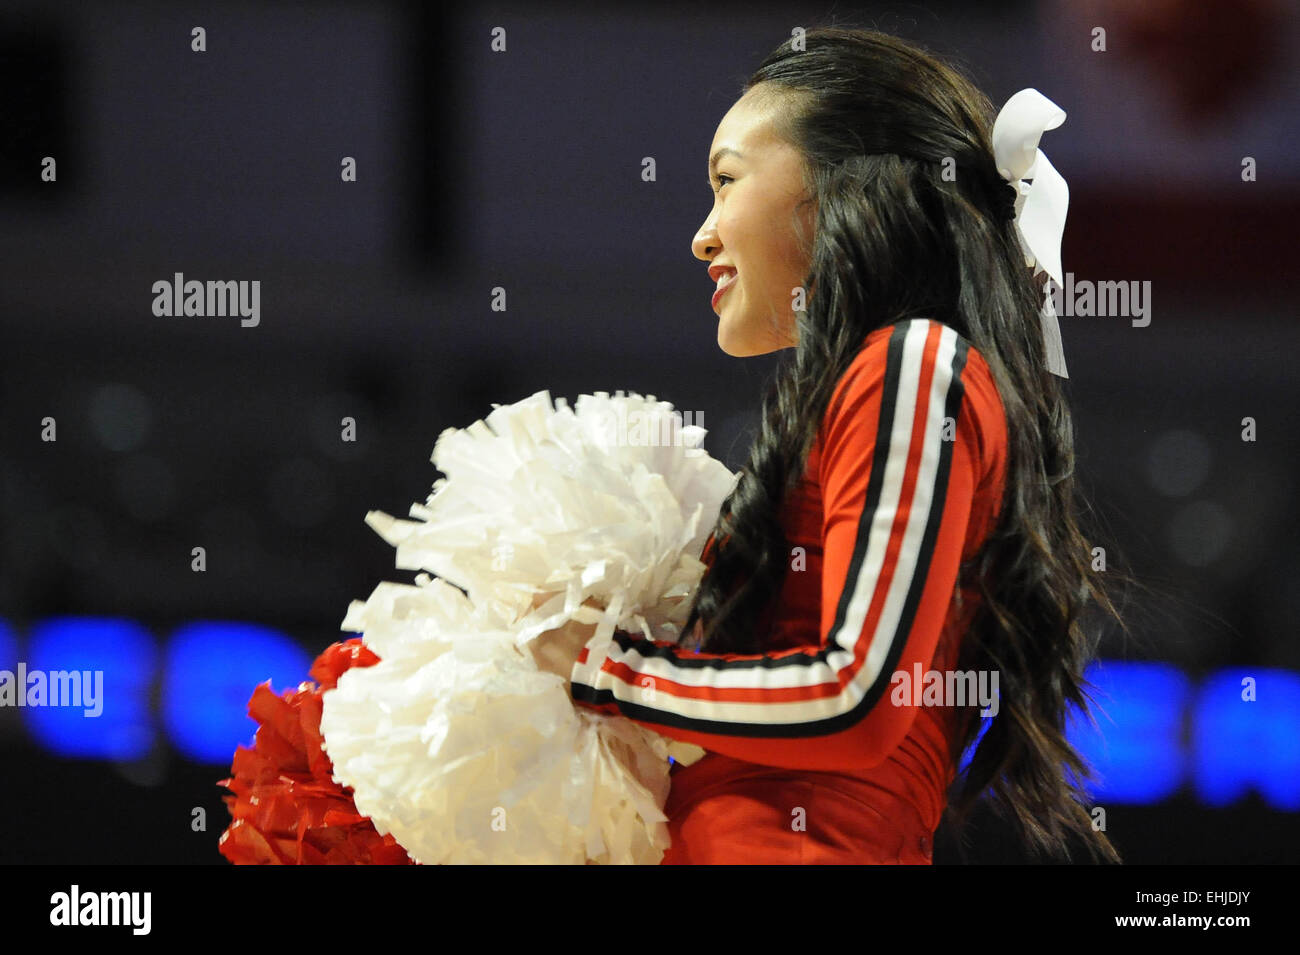 Chicago, IL, USA. 14th Mar, 2015. Wisconsin Badgers cheerleader in action before the first half during the 2015 Big Ten Men's Basketball Tournament game between the Wisconsin Badgers and the Purdue Boilermakers at the United Center in Chicago, IL. Patrick Gorski/CSM/Alamy Live News Stock Photo